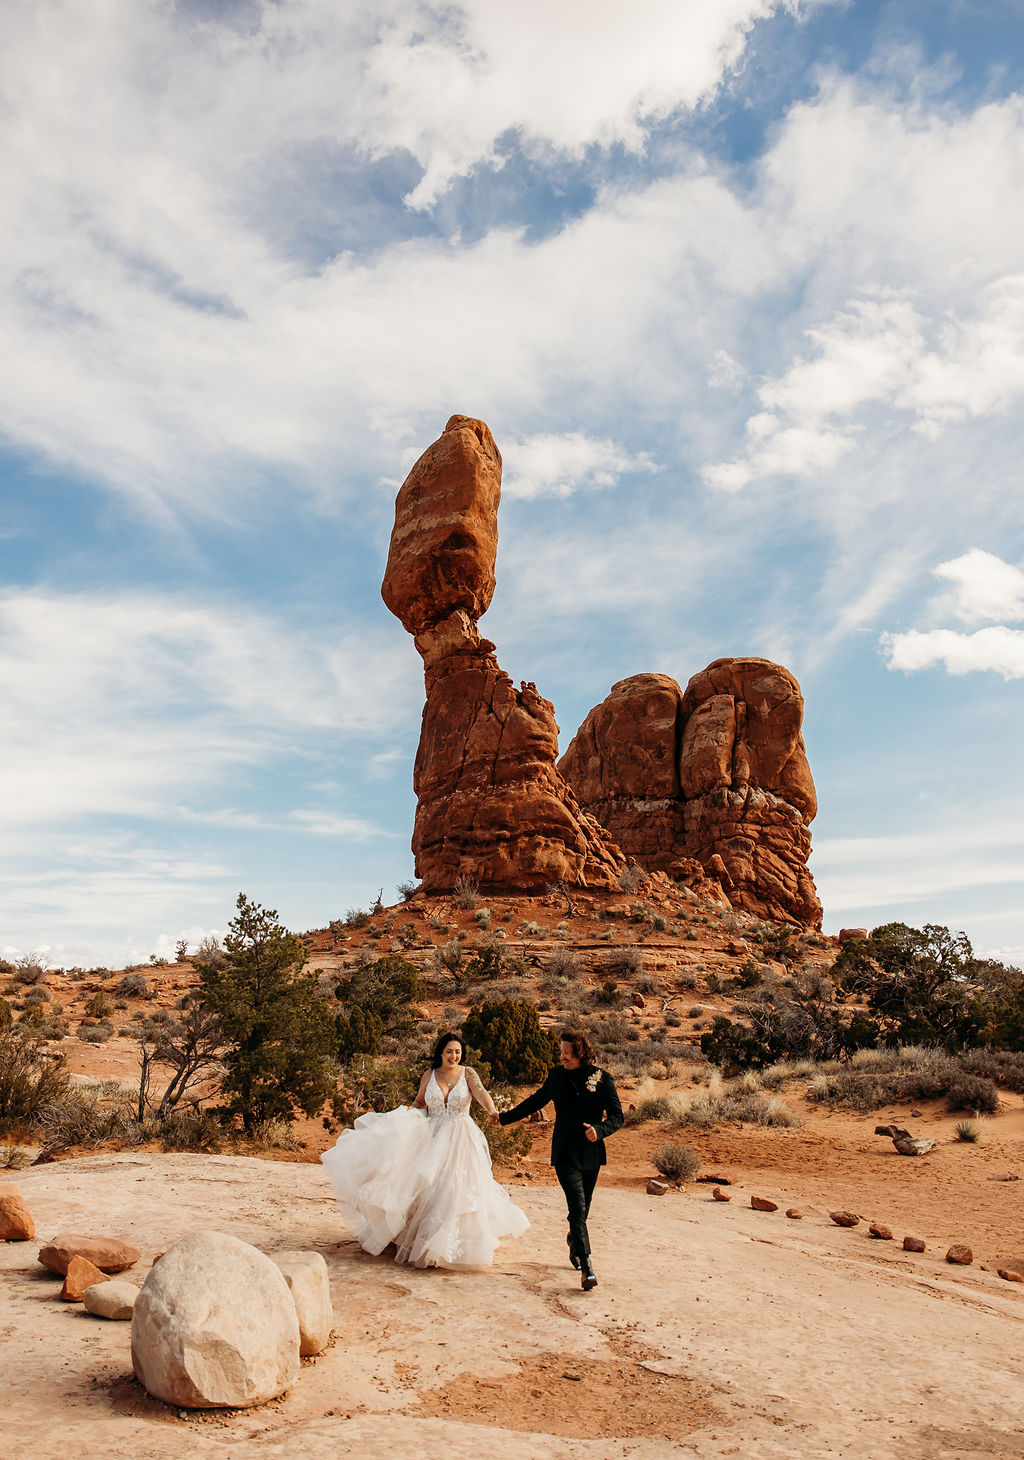 A couple in wedding attire walking hand in hand near a towering rock formation under a cloudy sky. | PHOTOGRAPHY BY BROGAN |  5 REASONS TO HAVE A MOAB NATIONAL PARK ELOPEMENT 